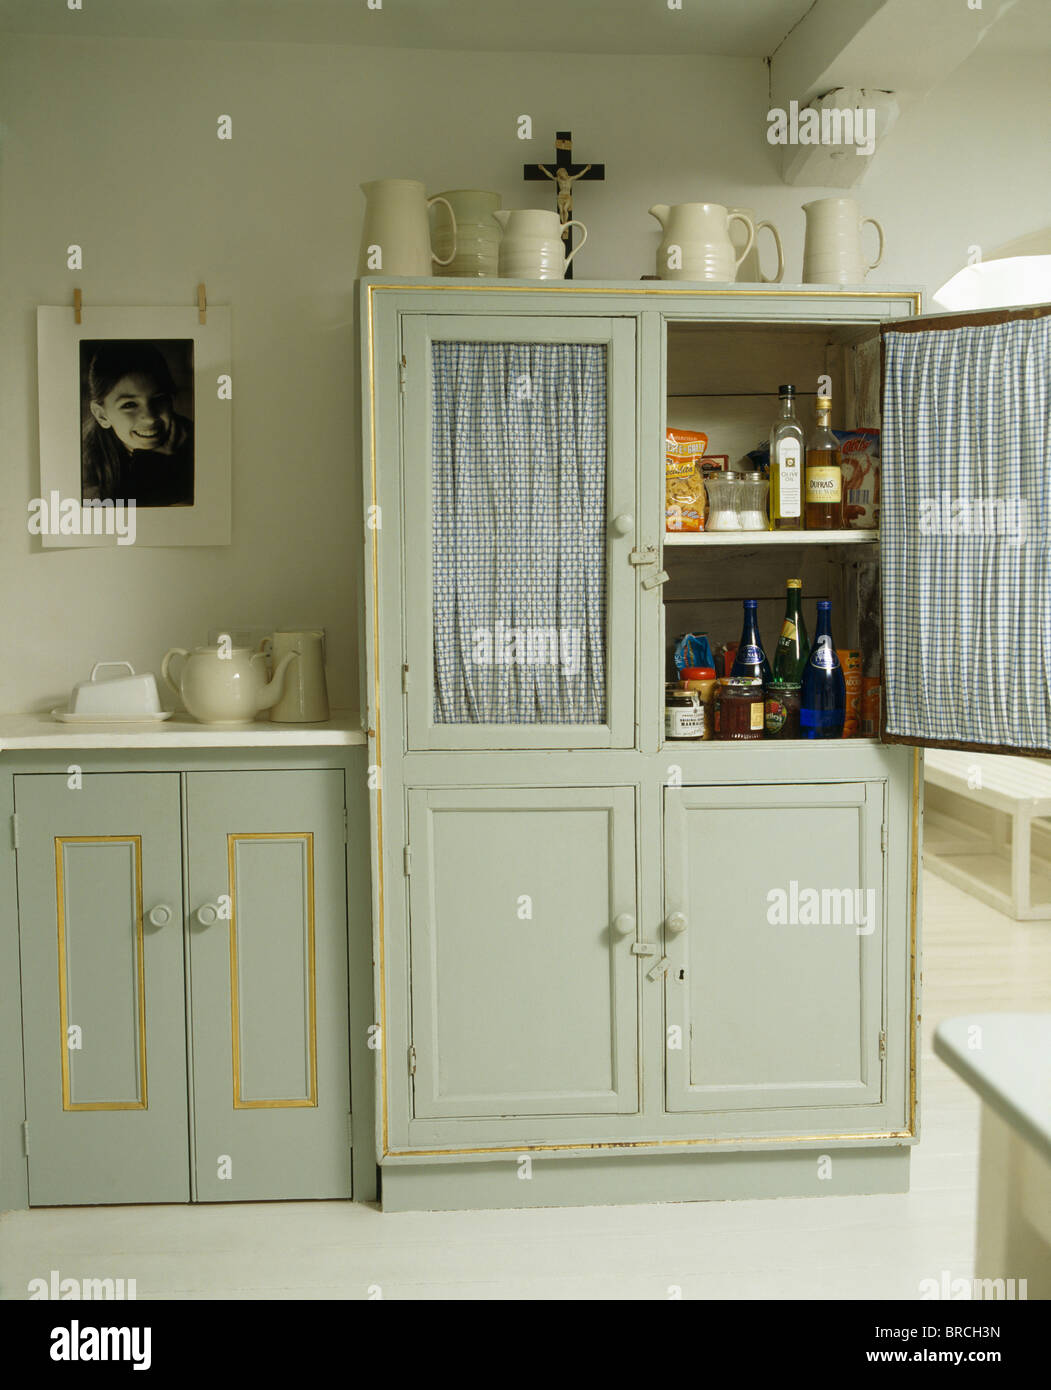 https://c8.alamy.com/comp/BRCH3N/fitted-pale-gray-dresser-with-curtains-behind-glazed-doors-in-cottage-BRCH3N.jpg